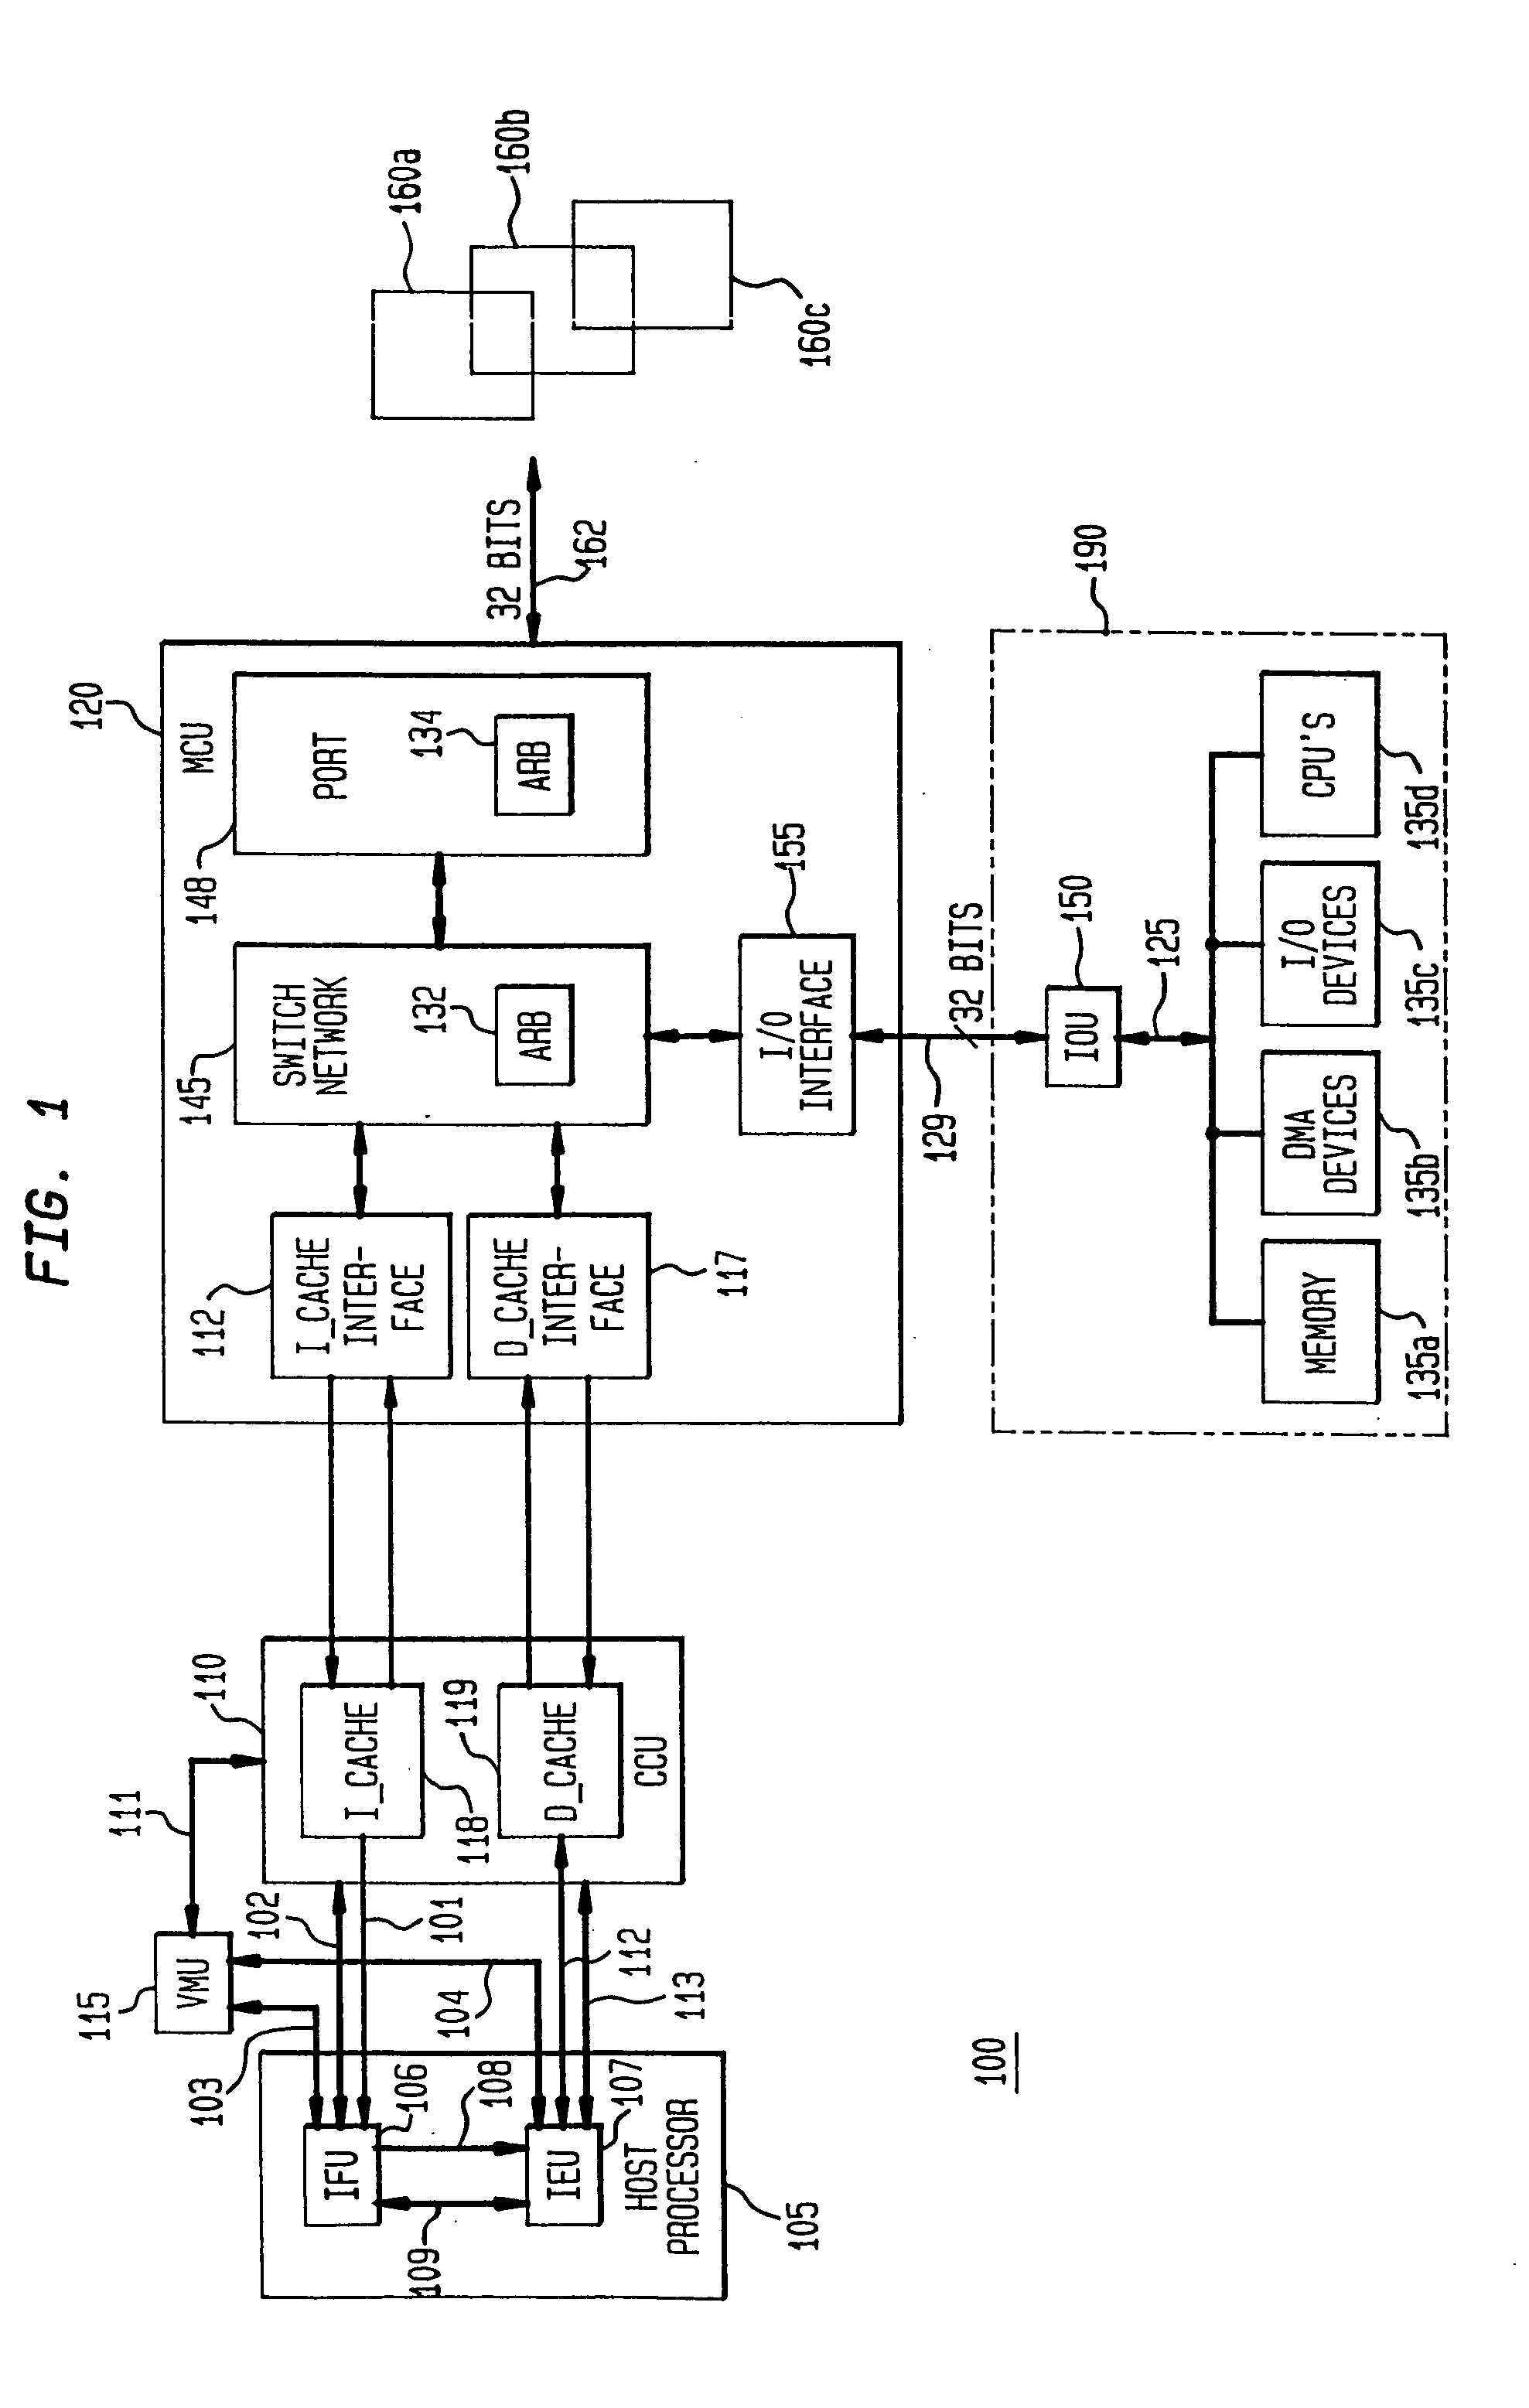 System and method for handling load and/or store operations an a supperscalar microprocessor